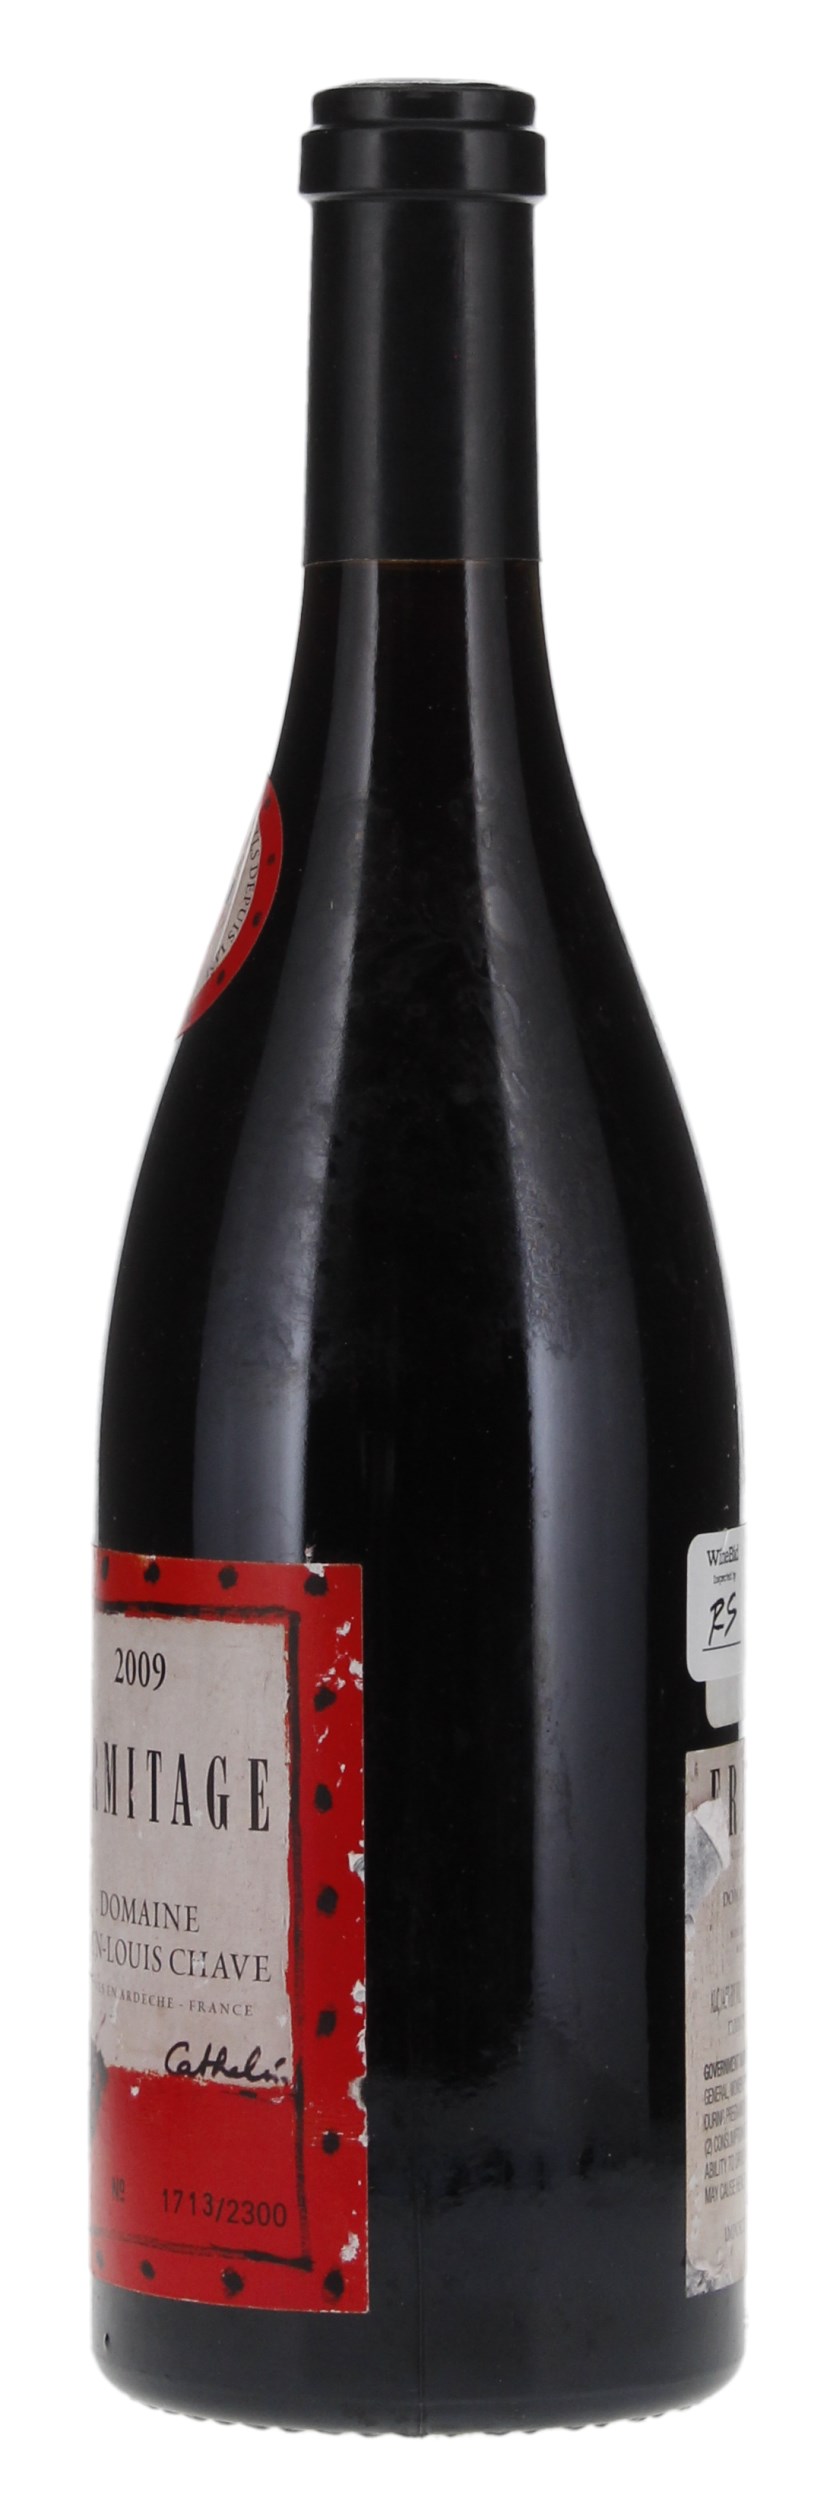 2009 Jean-Louis Chave Ermitage Cuvee Cathelin, 750ml